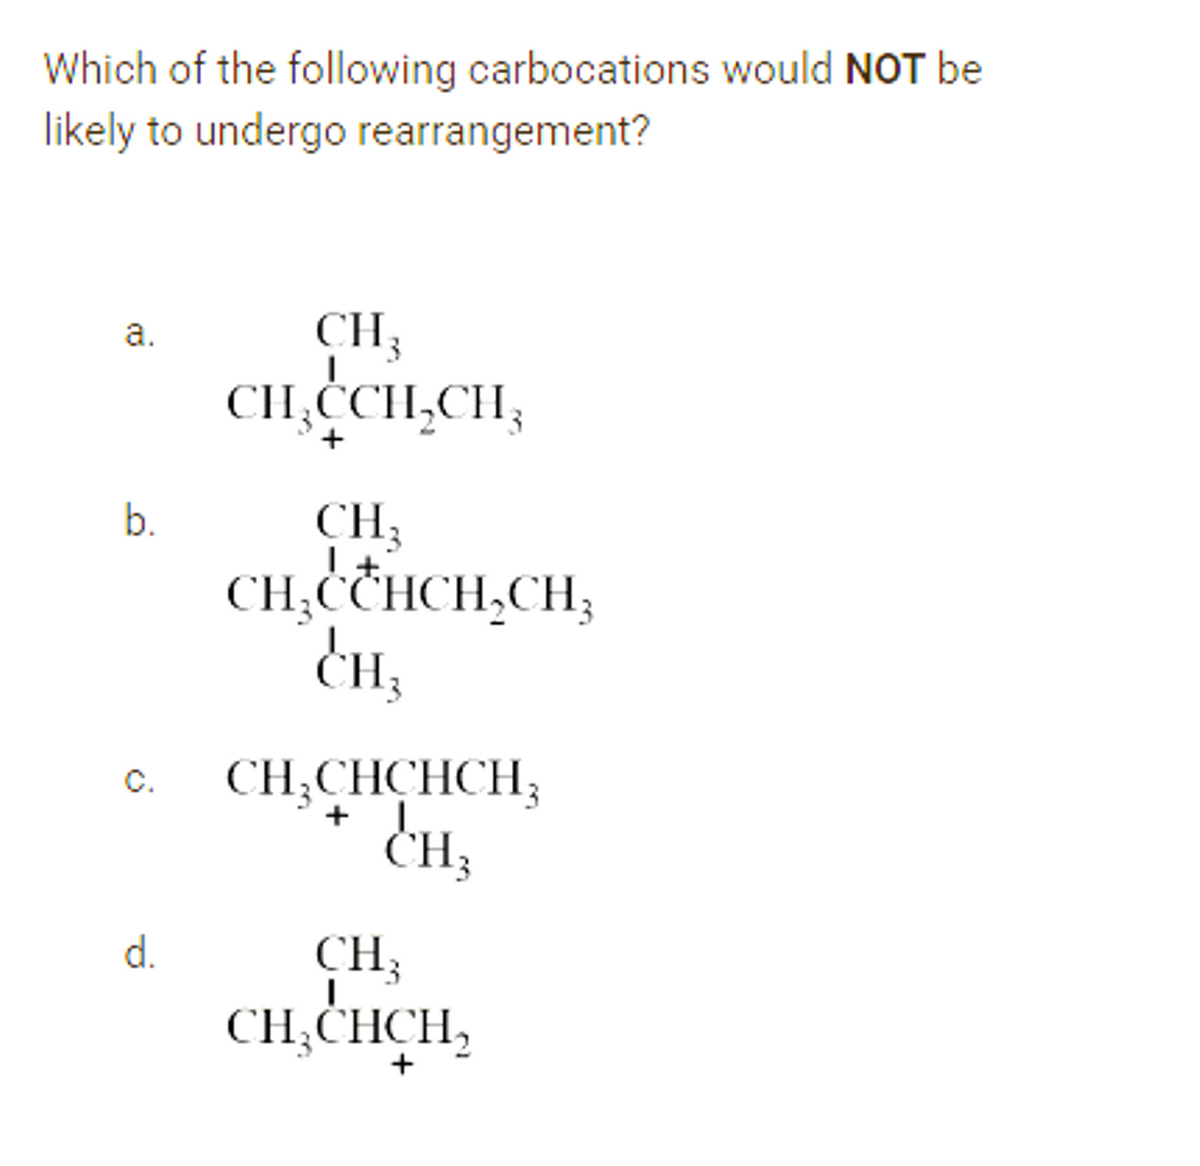 Which of the following carbocations would NOT be
likely to undergo rearrangement?
CH3
CH,CCH,CH,
a.
+
CH3
CH,CCHCH,CH,
b.
CH;CHCHCH;
+ 1.
CH3
C.
CH;
CH,CHCH,
d.
+
